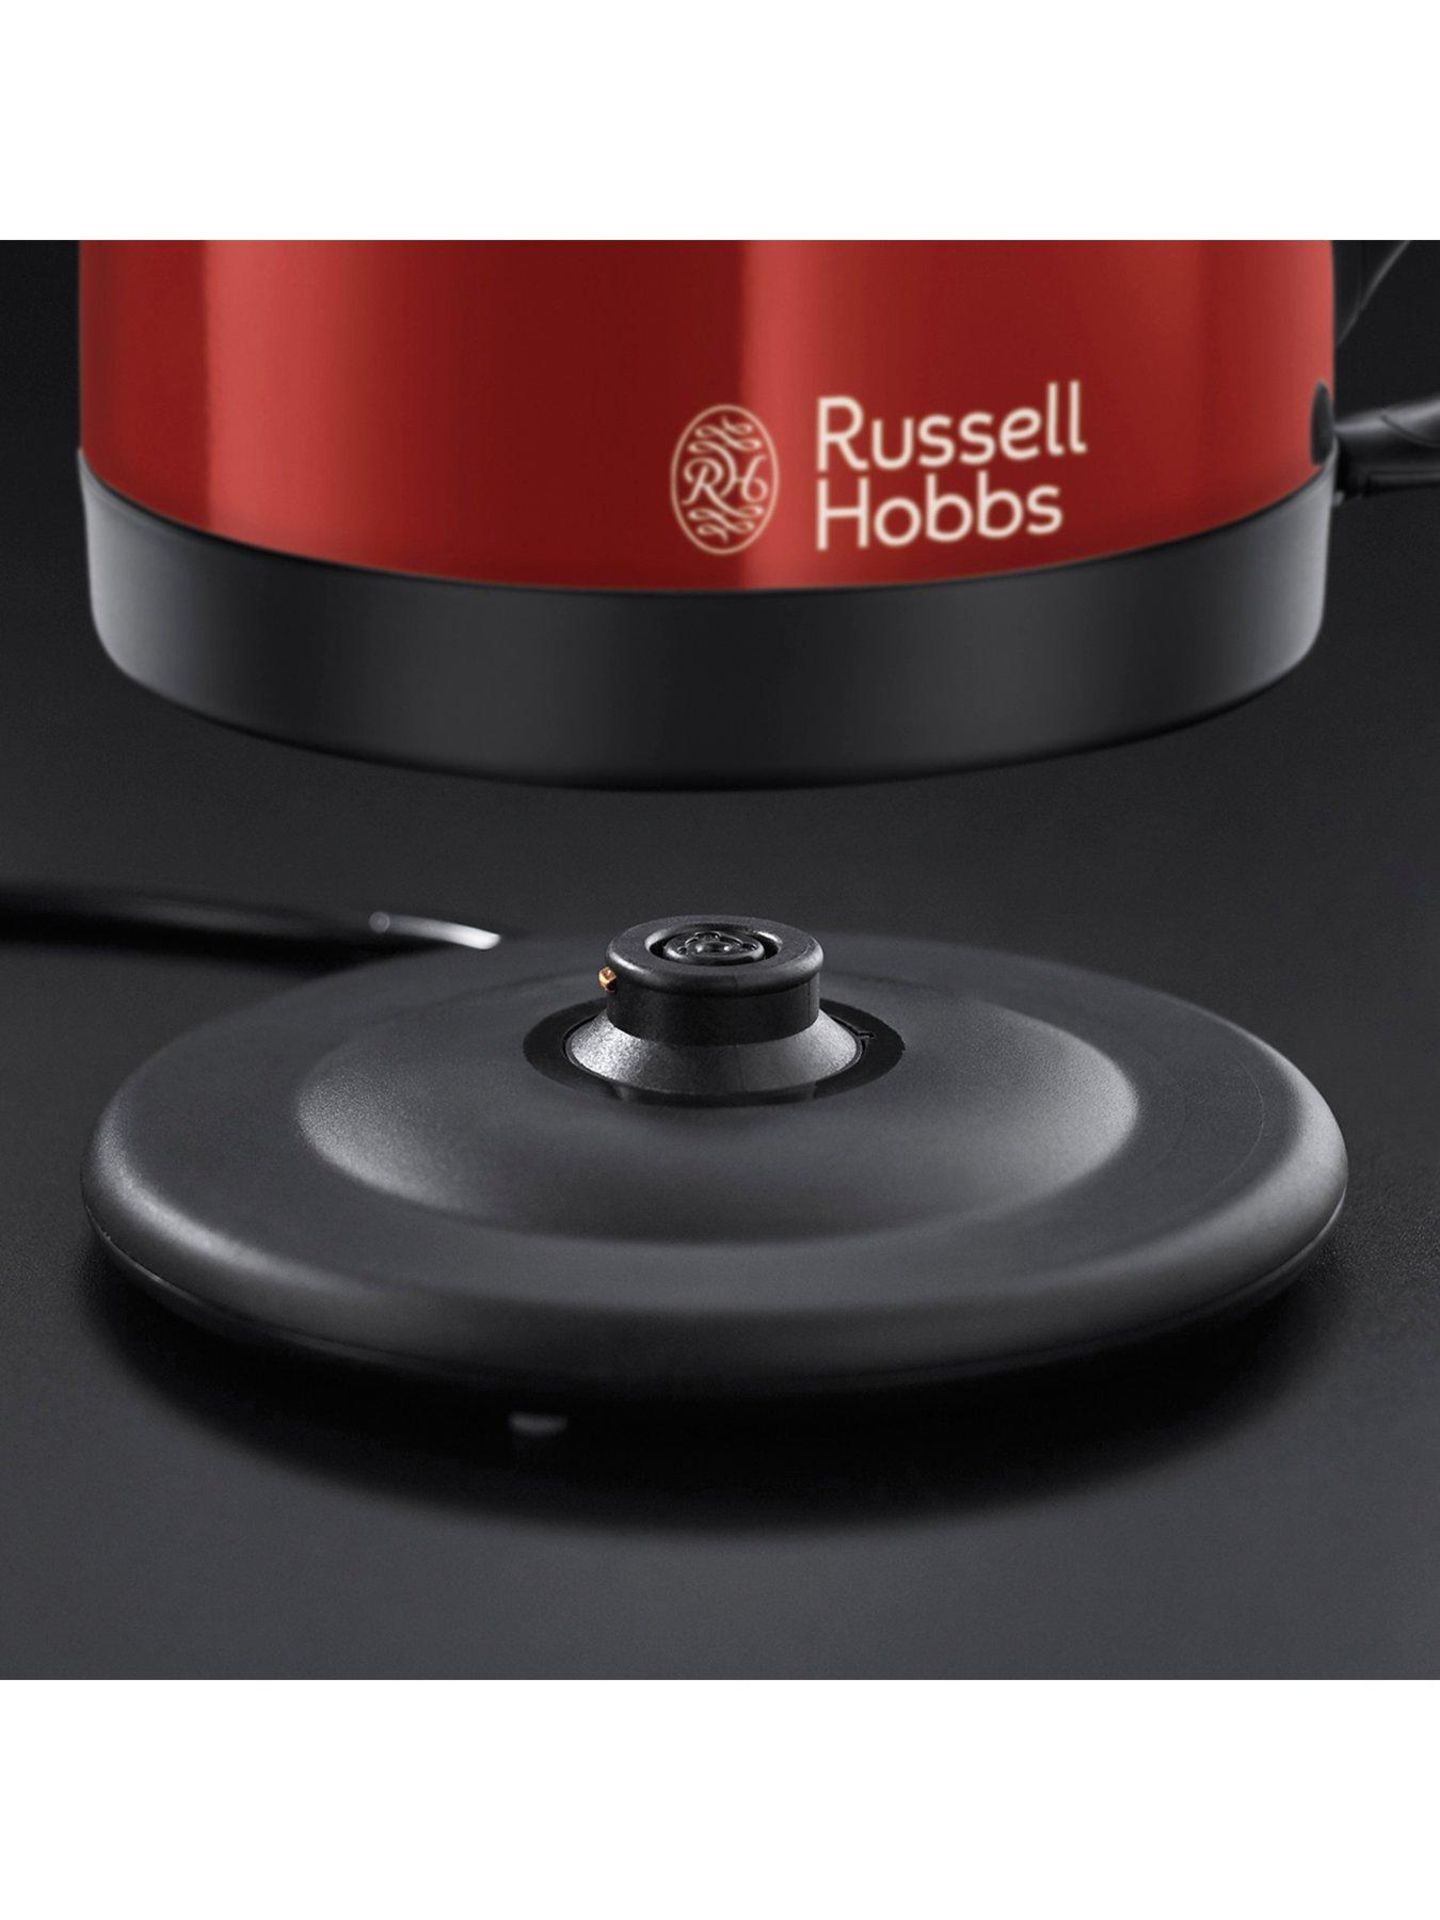 V Brand New Russel Hobbs Red Dorchester Kettle - Perfect Pour - Saves Up To 70% Energy - Littlewoods - Image 6 of 10